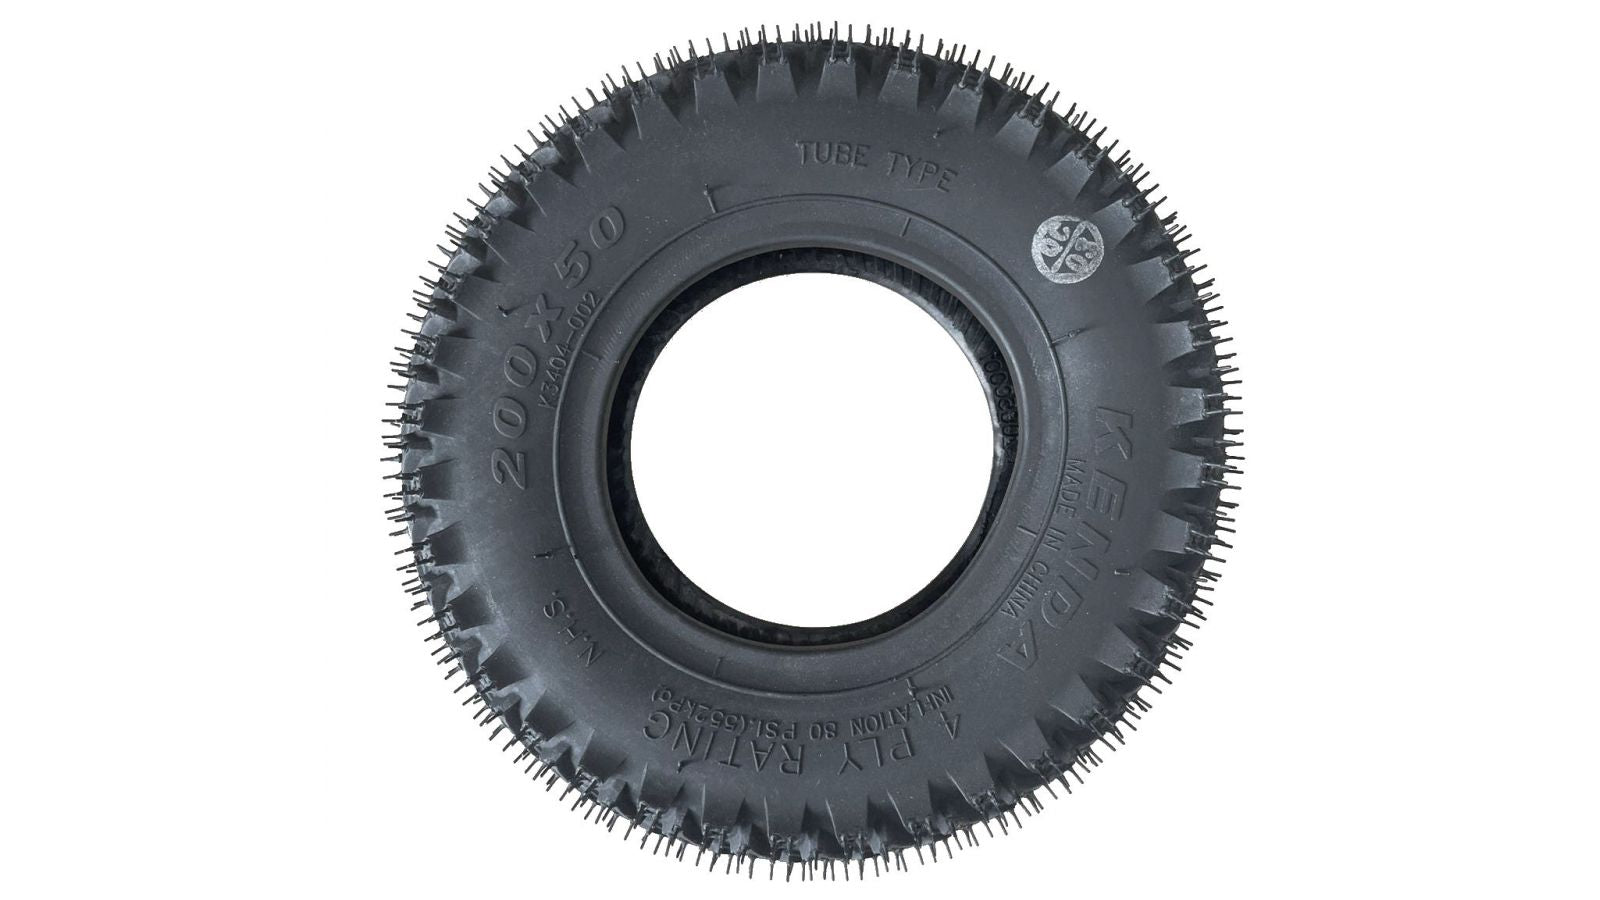 Tire 200mm/8in Roadstar - Roll and Pole